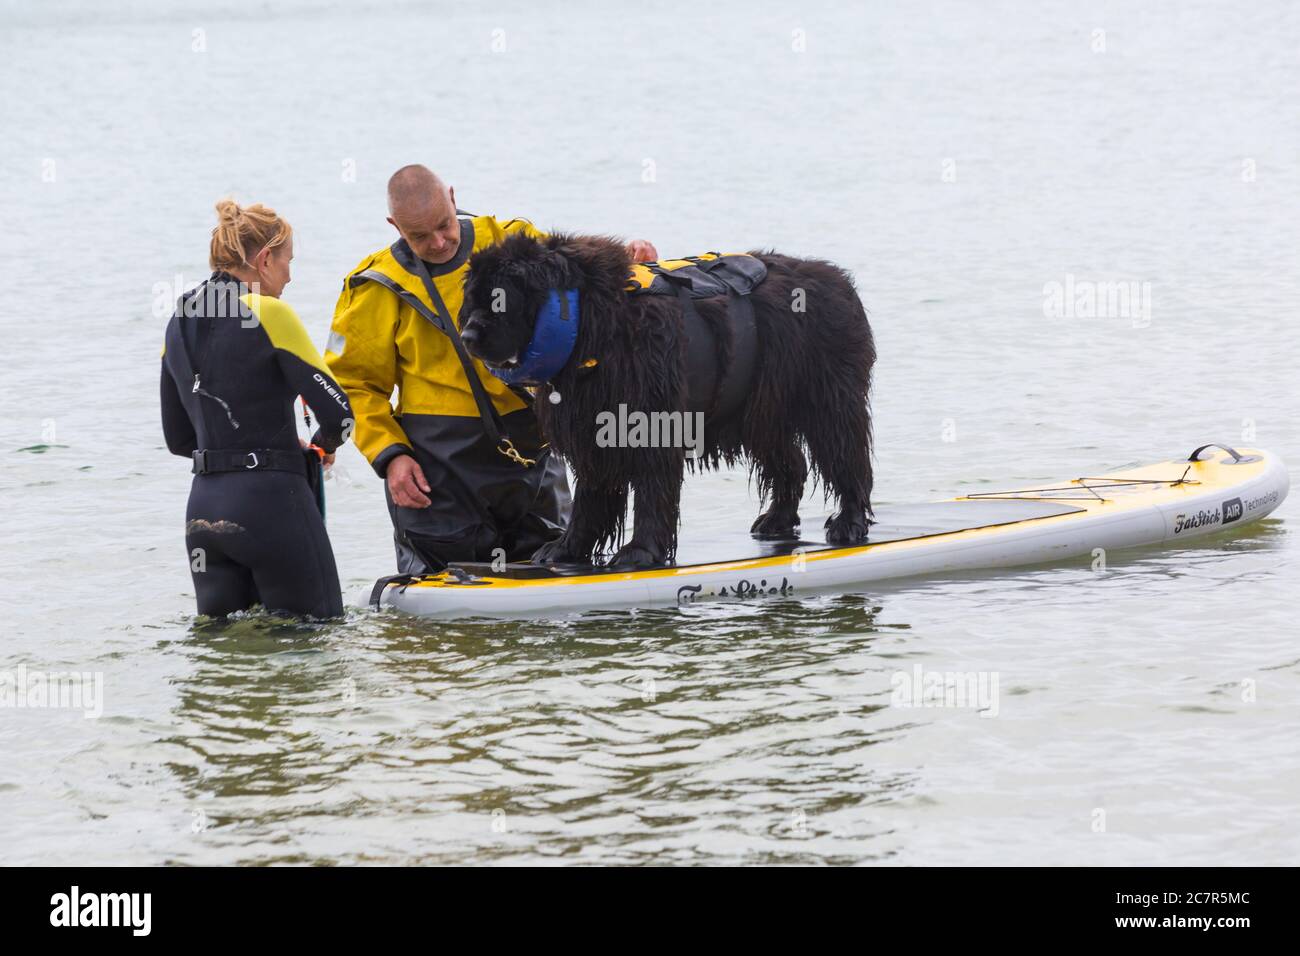 Poole, Dorset UK. 19th July 2020. Dog training sessions on the beach with dogs learning to paddleboard and increase their confidence in the sea. Newfoundland dog learning to paddleboard. Newfoundland dog standing on paddleboard. Credit: Carolyn Jenkins/Alamy Live News Stock Photo